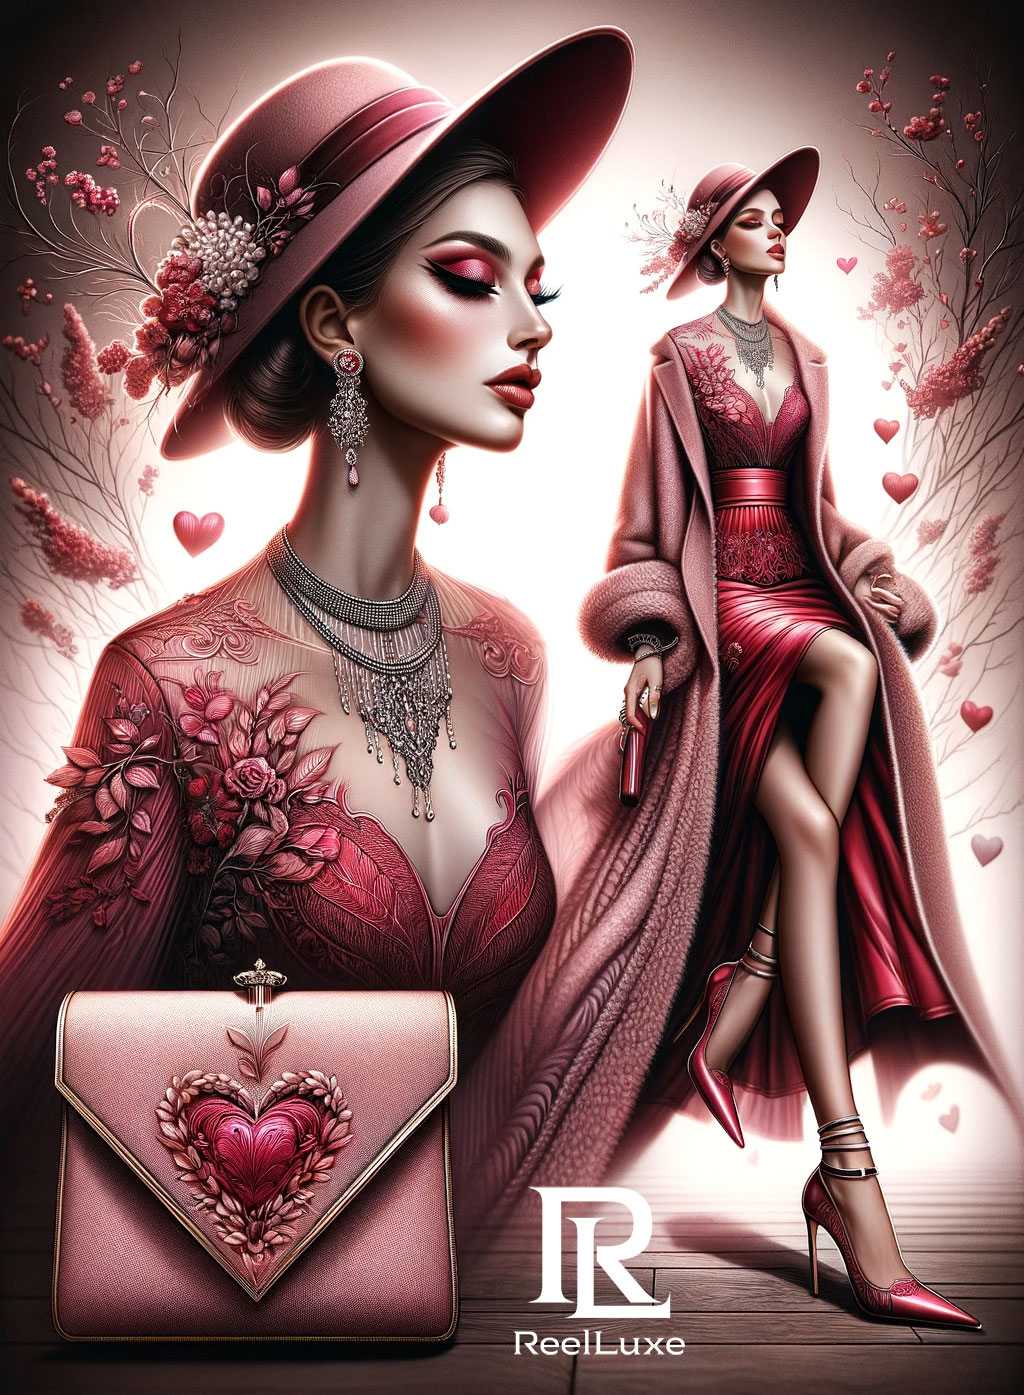 Romance in the Air - Valentine's Day - Beauty and Fashion - 8